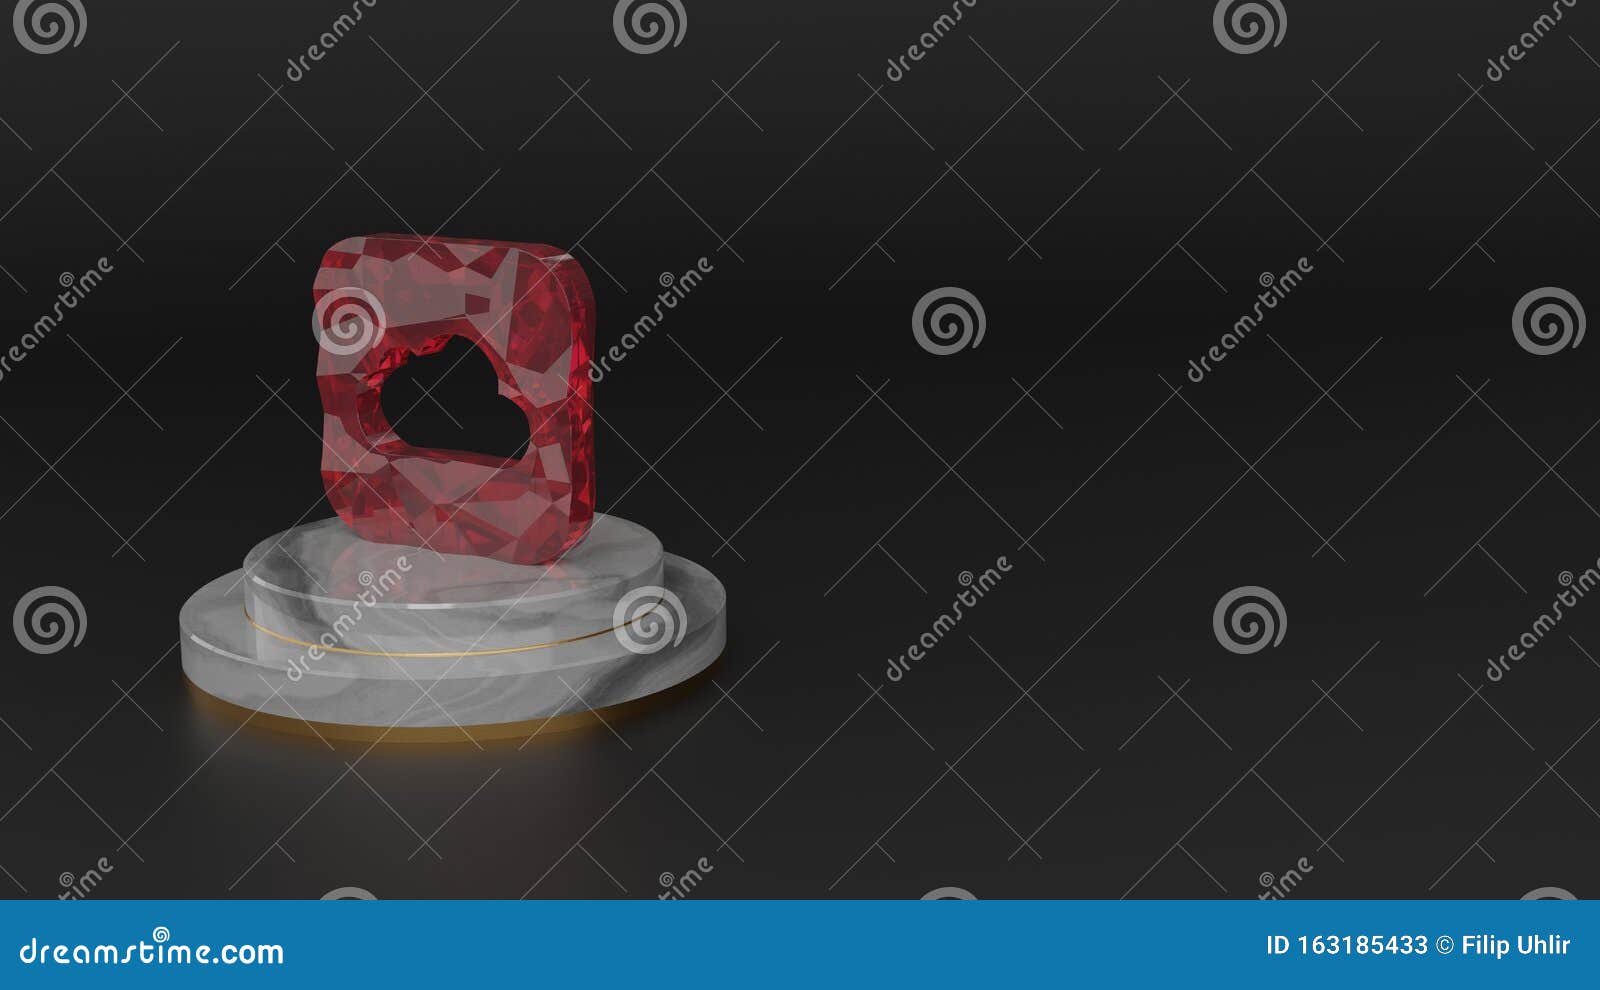 3d rendering of red gemstone icon of icloud drive app icon